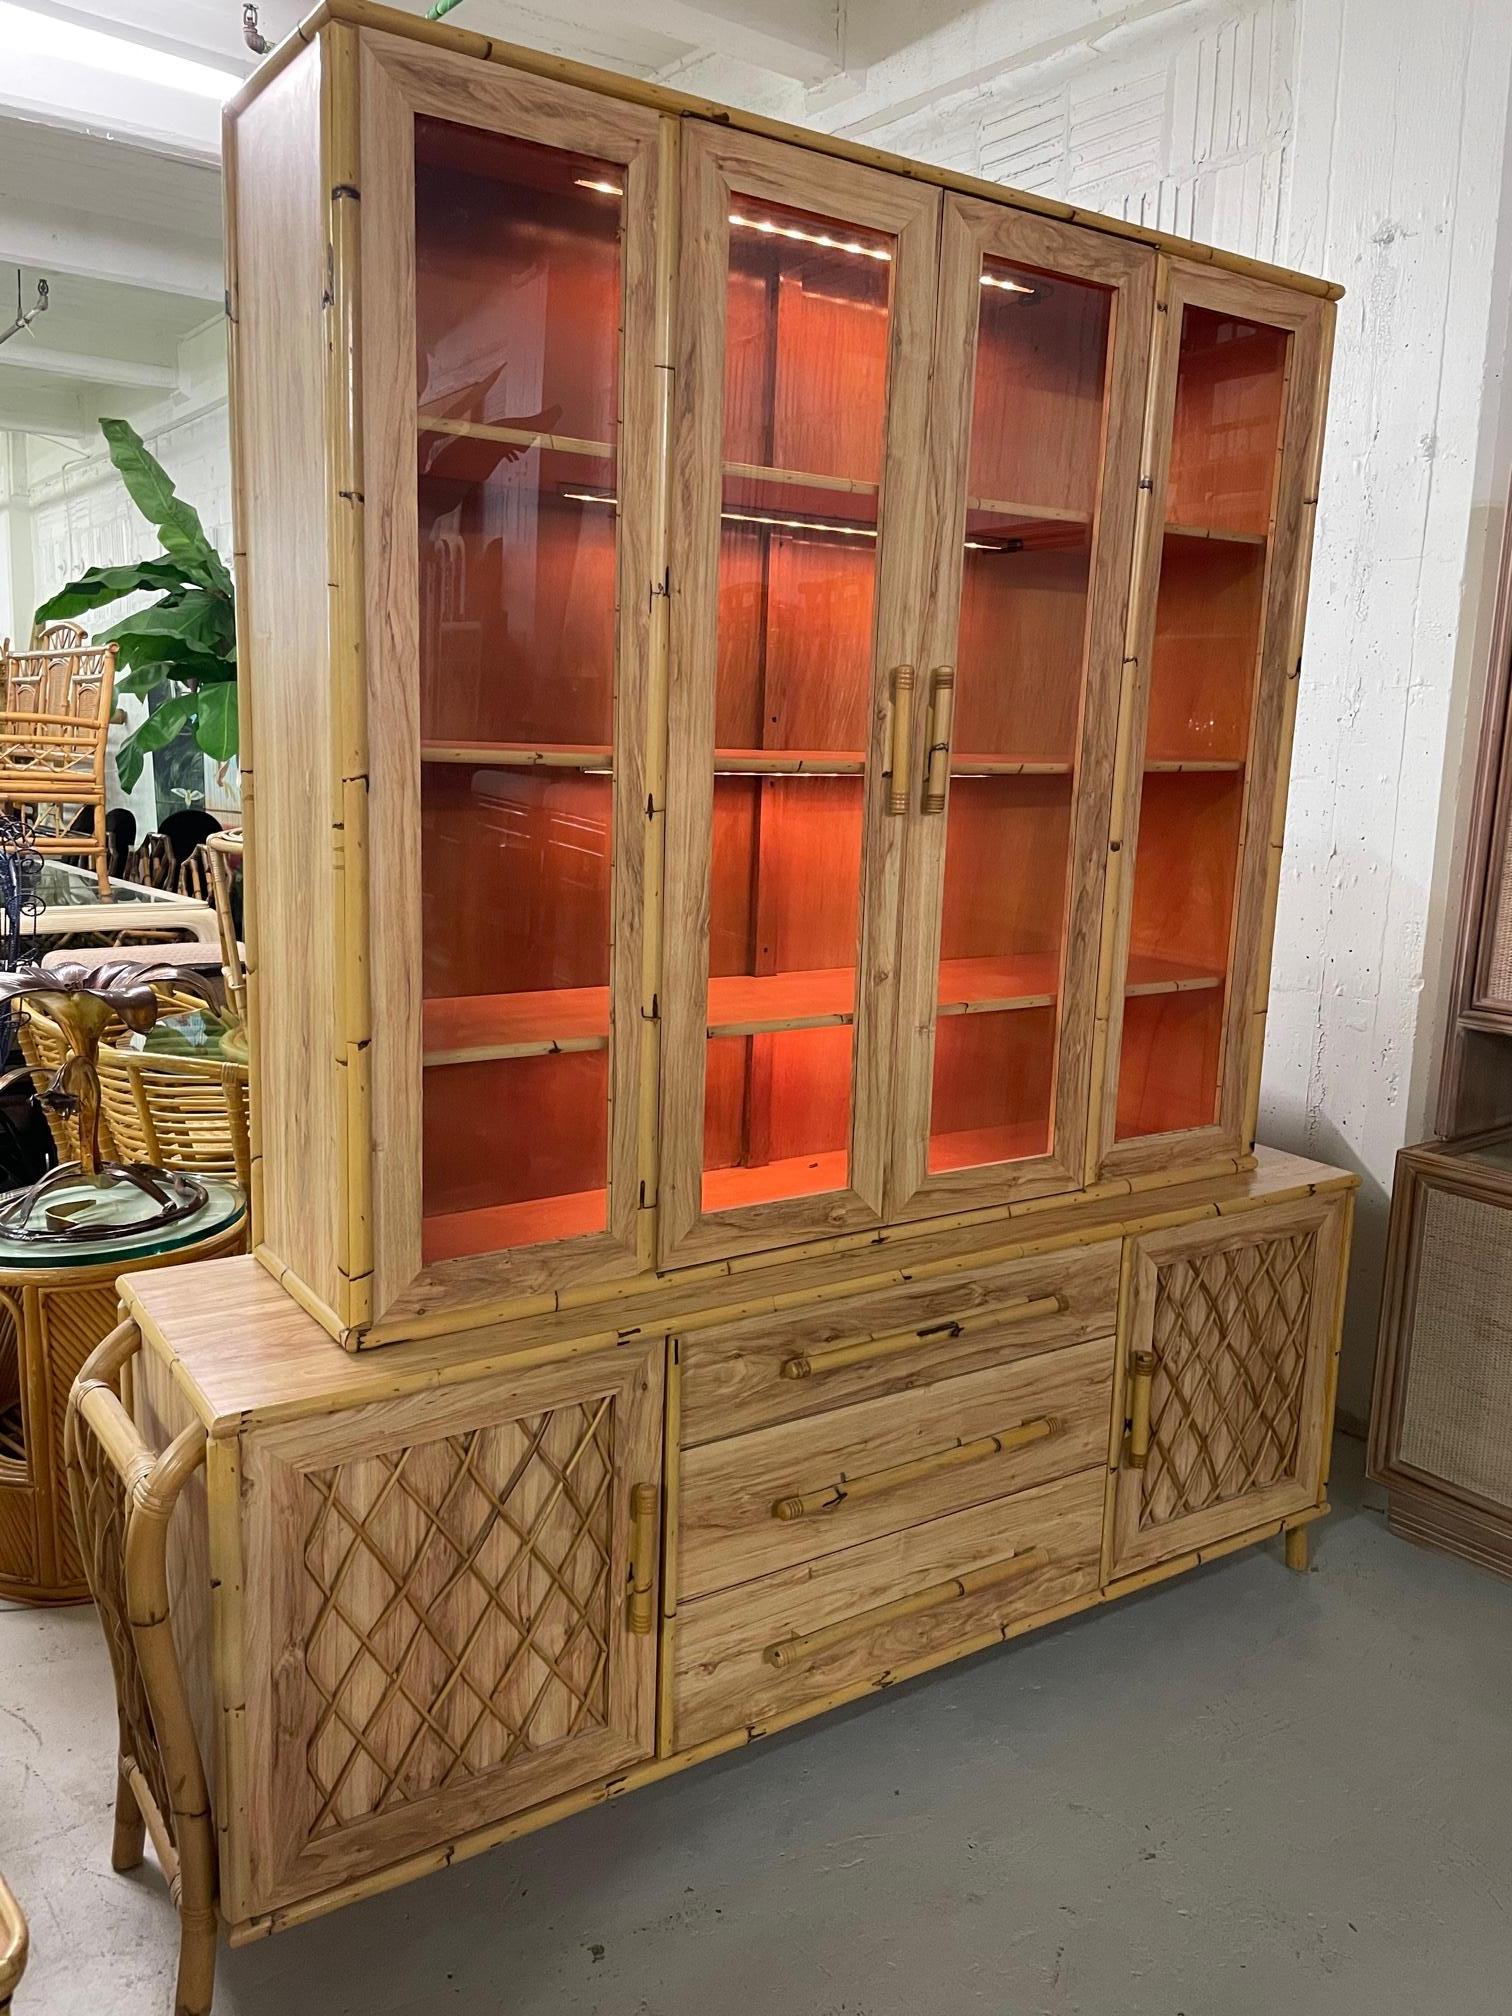 Large vintage display cabinet features a unique sculptural rattan frame and reeded fretwork on doors and sides. Faux wood veneers and lighted display shelves. Good condition with minor imperfections consistent with age.